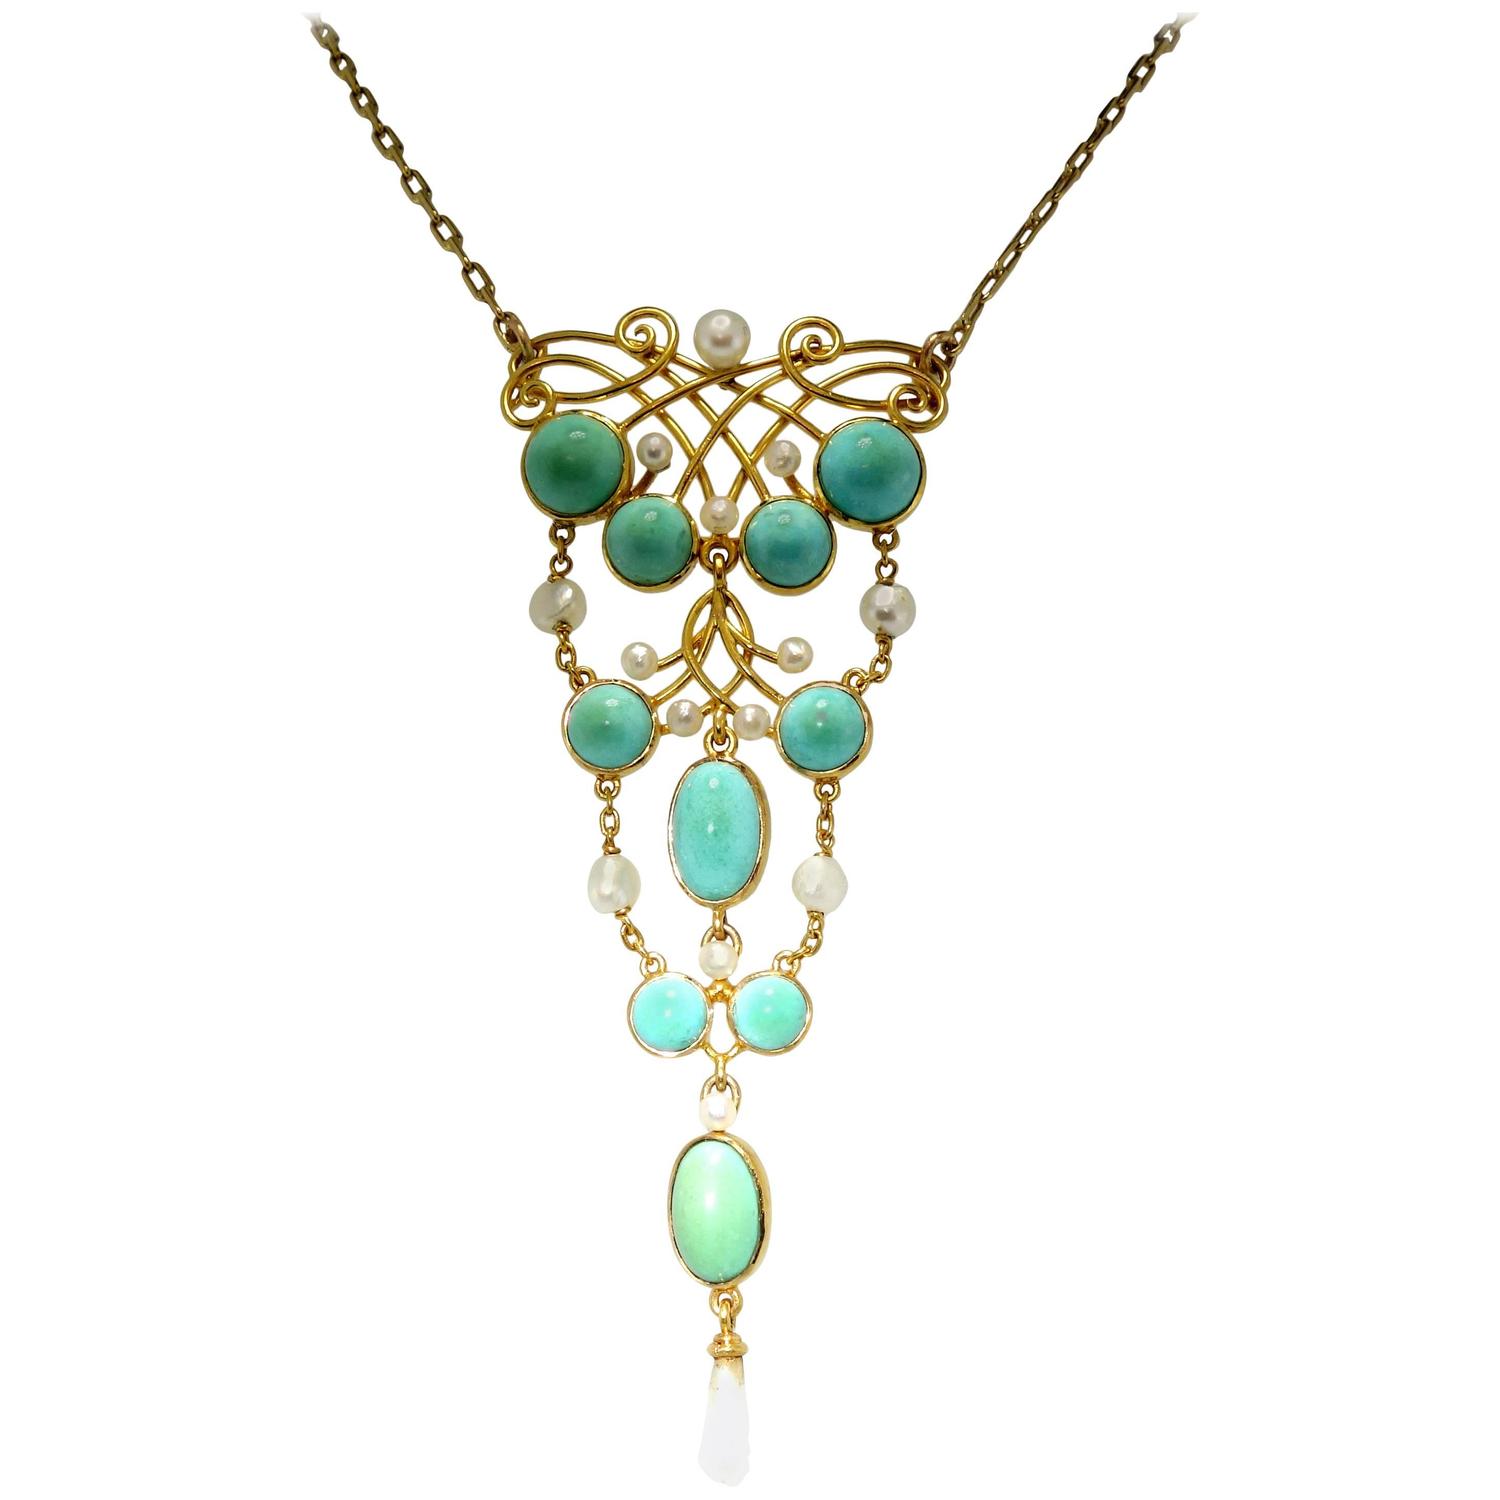 Art Nouveau Pearl Turquoise Gold Necklace For Sale at 1stdibs